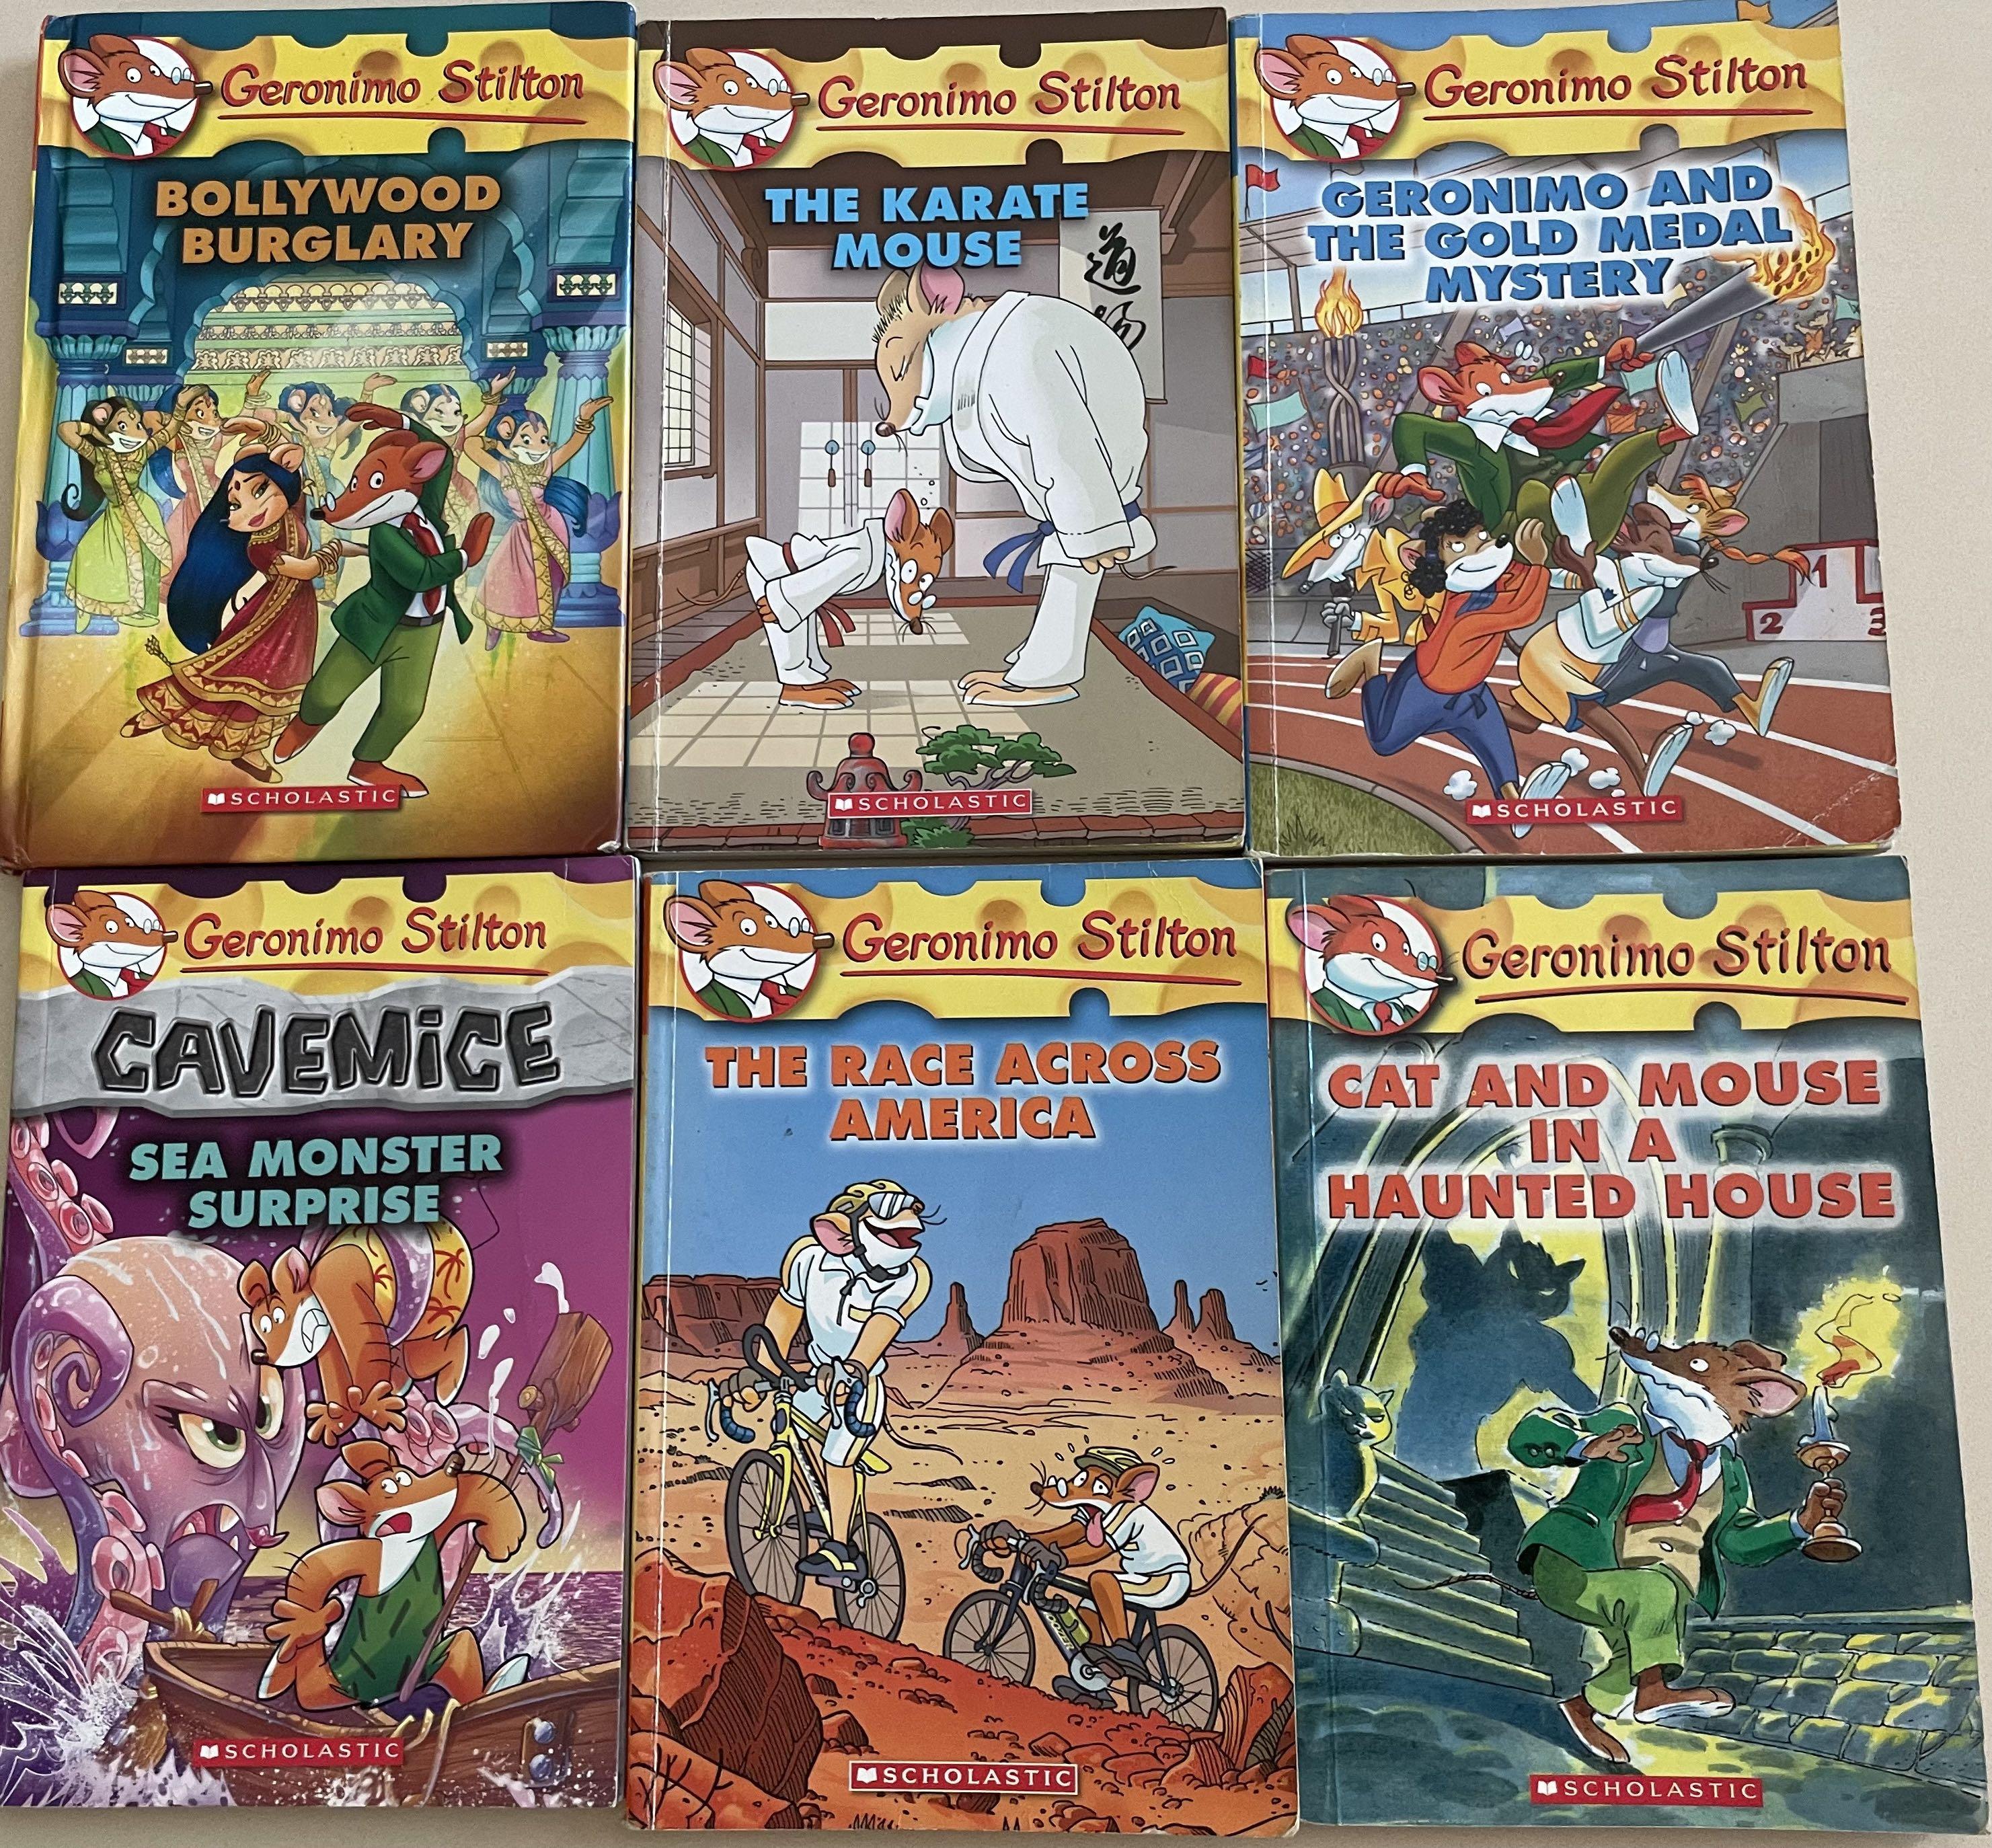 Geronimo Stilton Books Bollywood Burglary The Karate House Geronimo And The Gold Medal Mystery Cavmice Sea Monster Surprise The Race Across America And Cat And Mouse In A Haunted House Books Hobbies